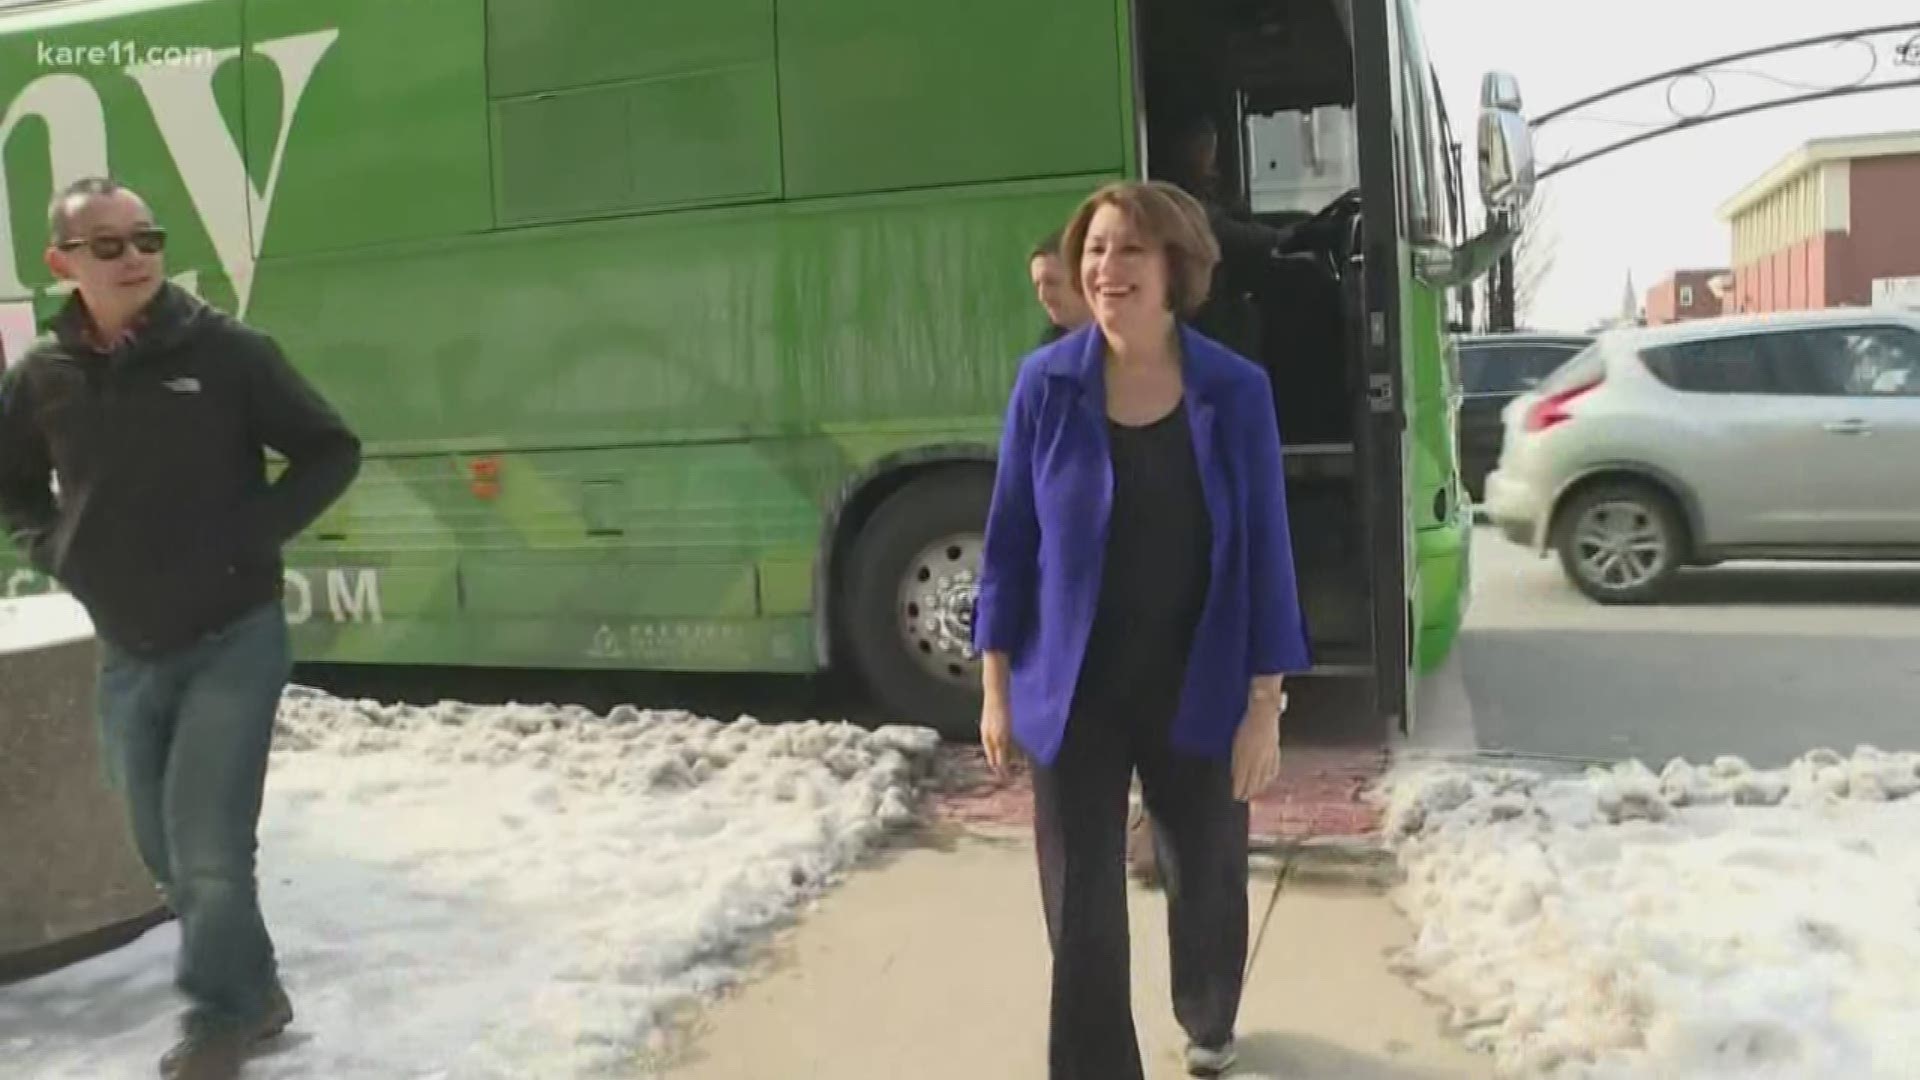 Other candidates are still way ahead in fundraising, but Klobuchar is gaining ground.